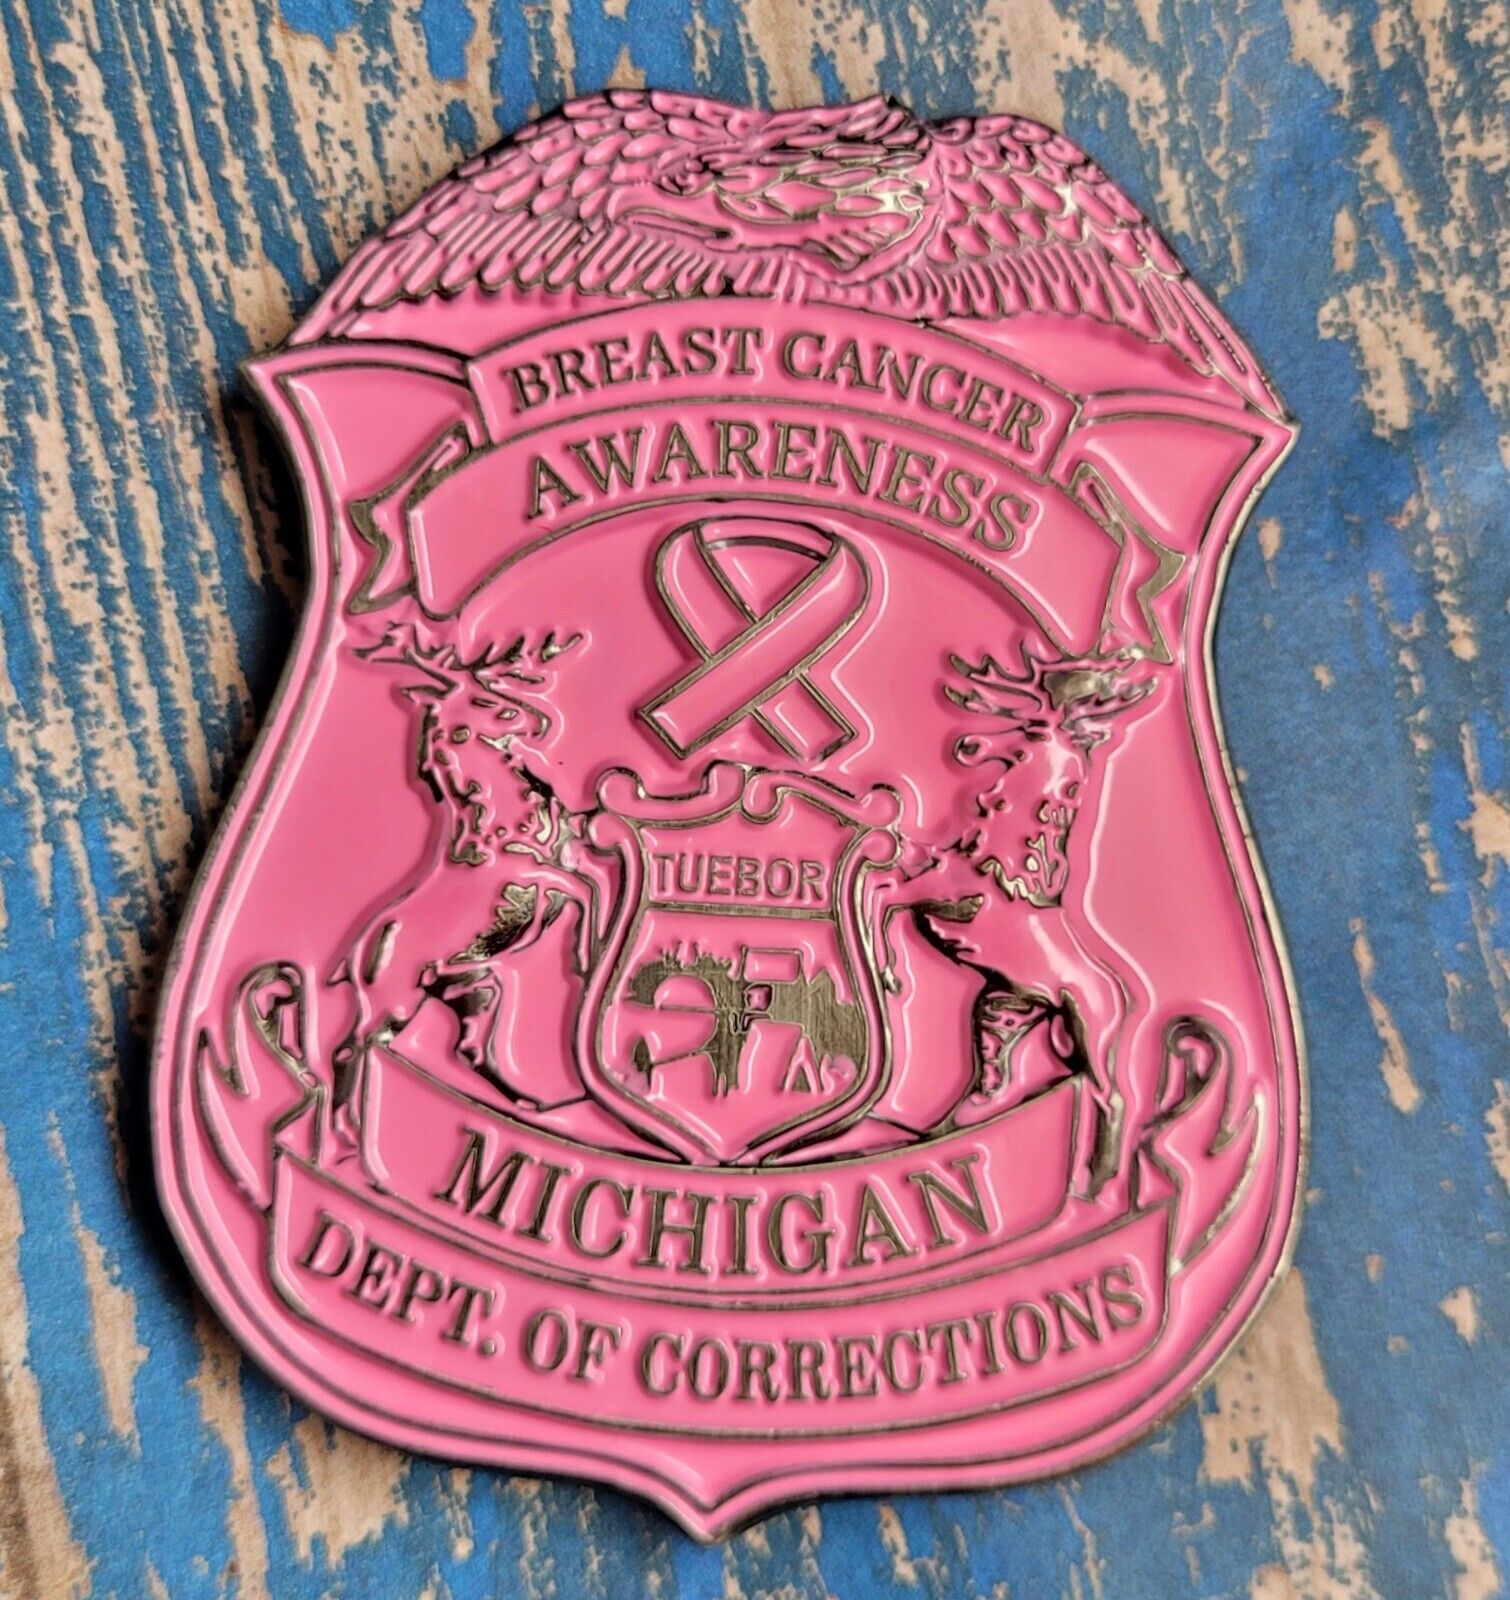 Michigan Breast Cancer Awareness Corrections Challenge Coin *Limited Production*